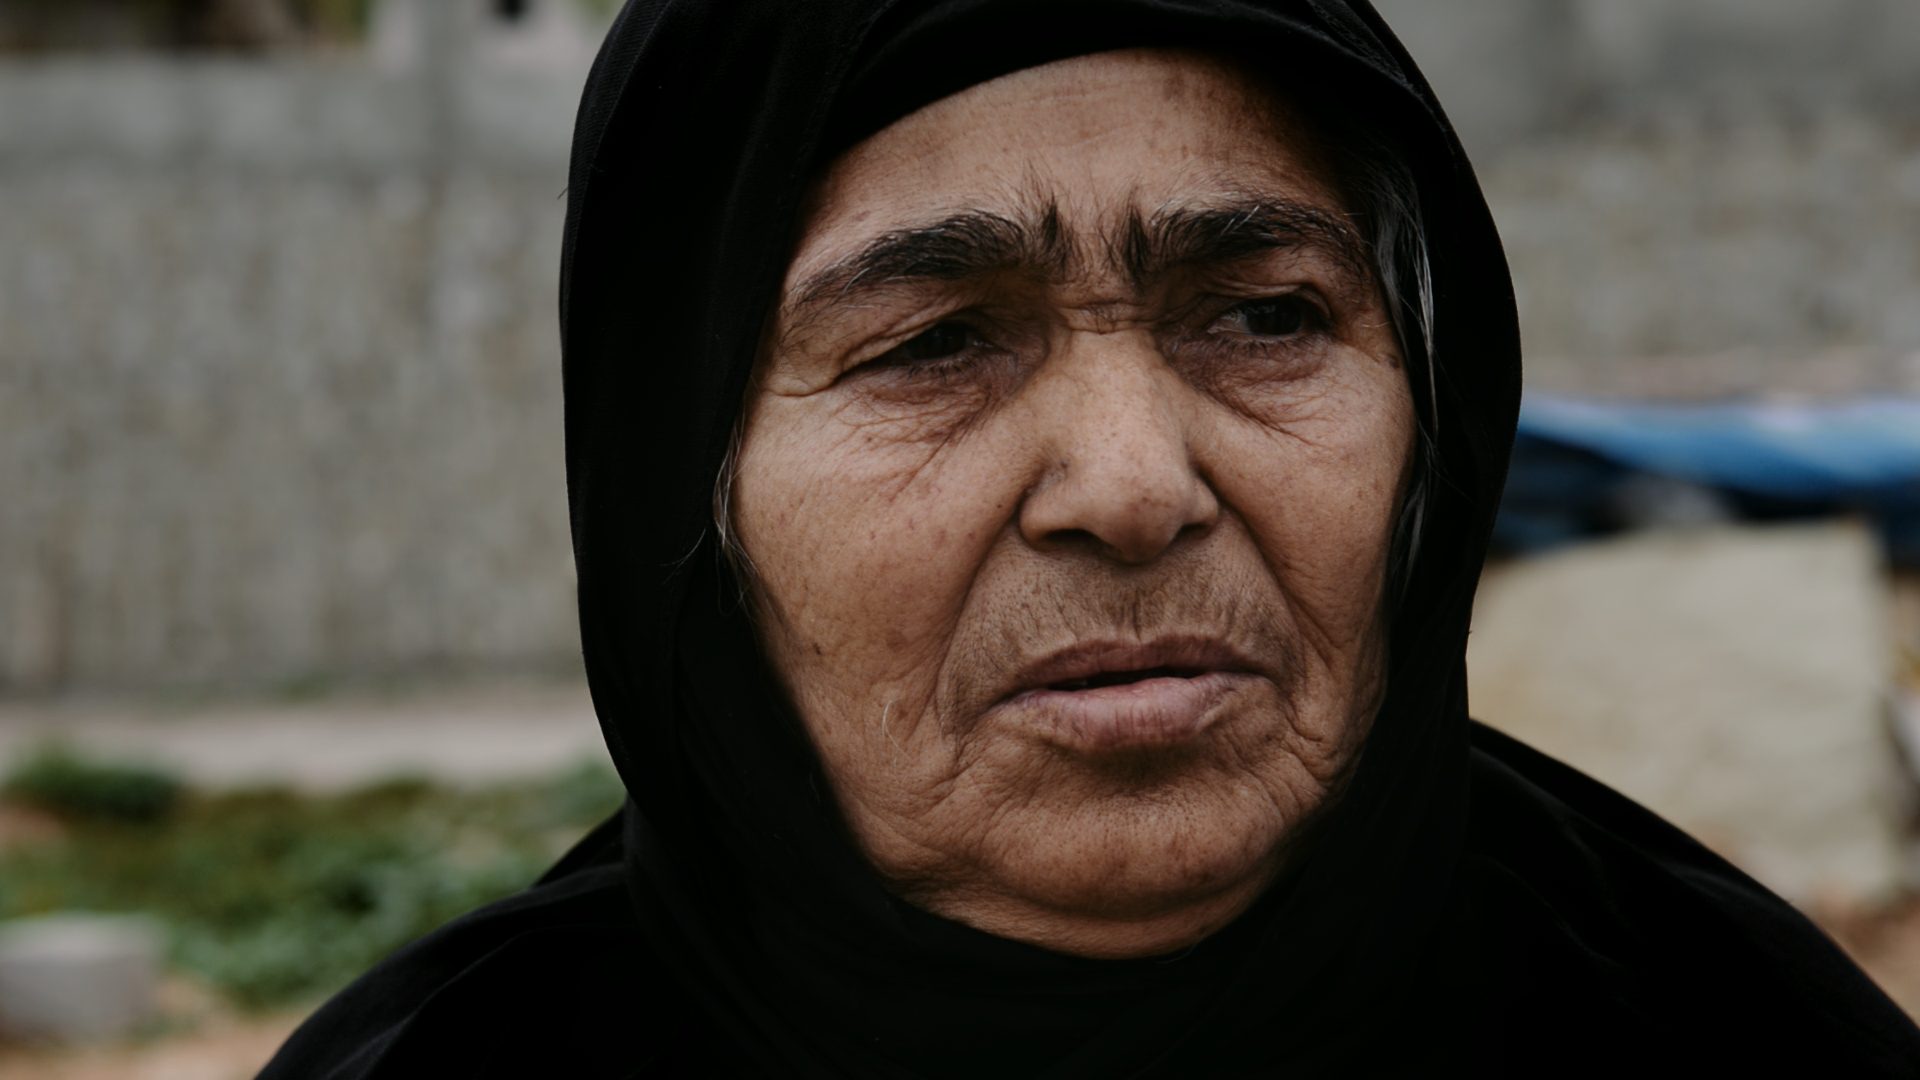 DOCTOR BAYAN RASUL reminisces with the Barzani women who she helped after their men were abducted in 1983. They describe themselves as “the living dead,” but say Doctor Bayan was like a mother to them. The women say they now feel inwardly calm and reassured knowing that their men’s remains and belongings are back with them in Barzan. 